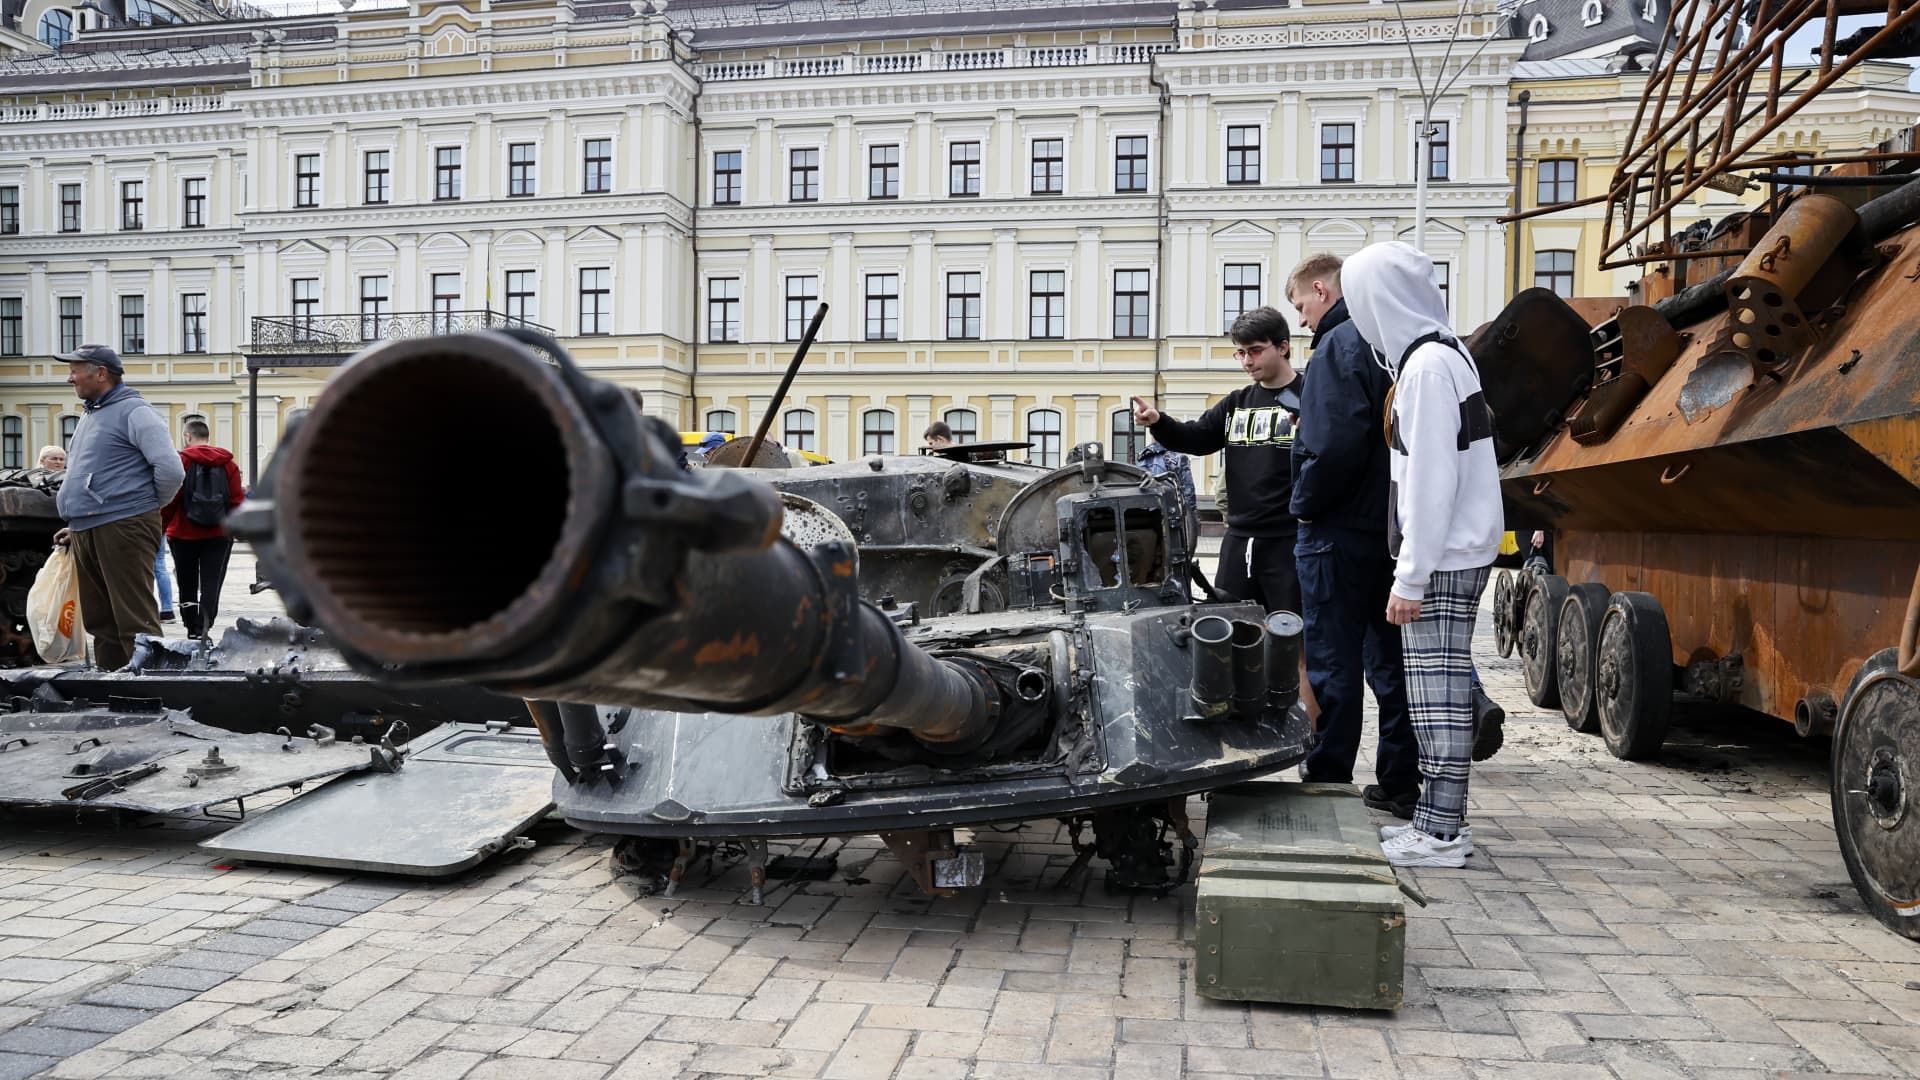 Destroyed Russian tanks and military equipment on display for public at Mykhailivska Square in Kyiv, Ukraine on May 23, 2022 as Russian-Ukrainian conflict continues.